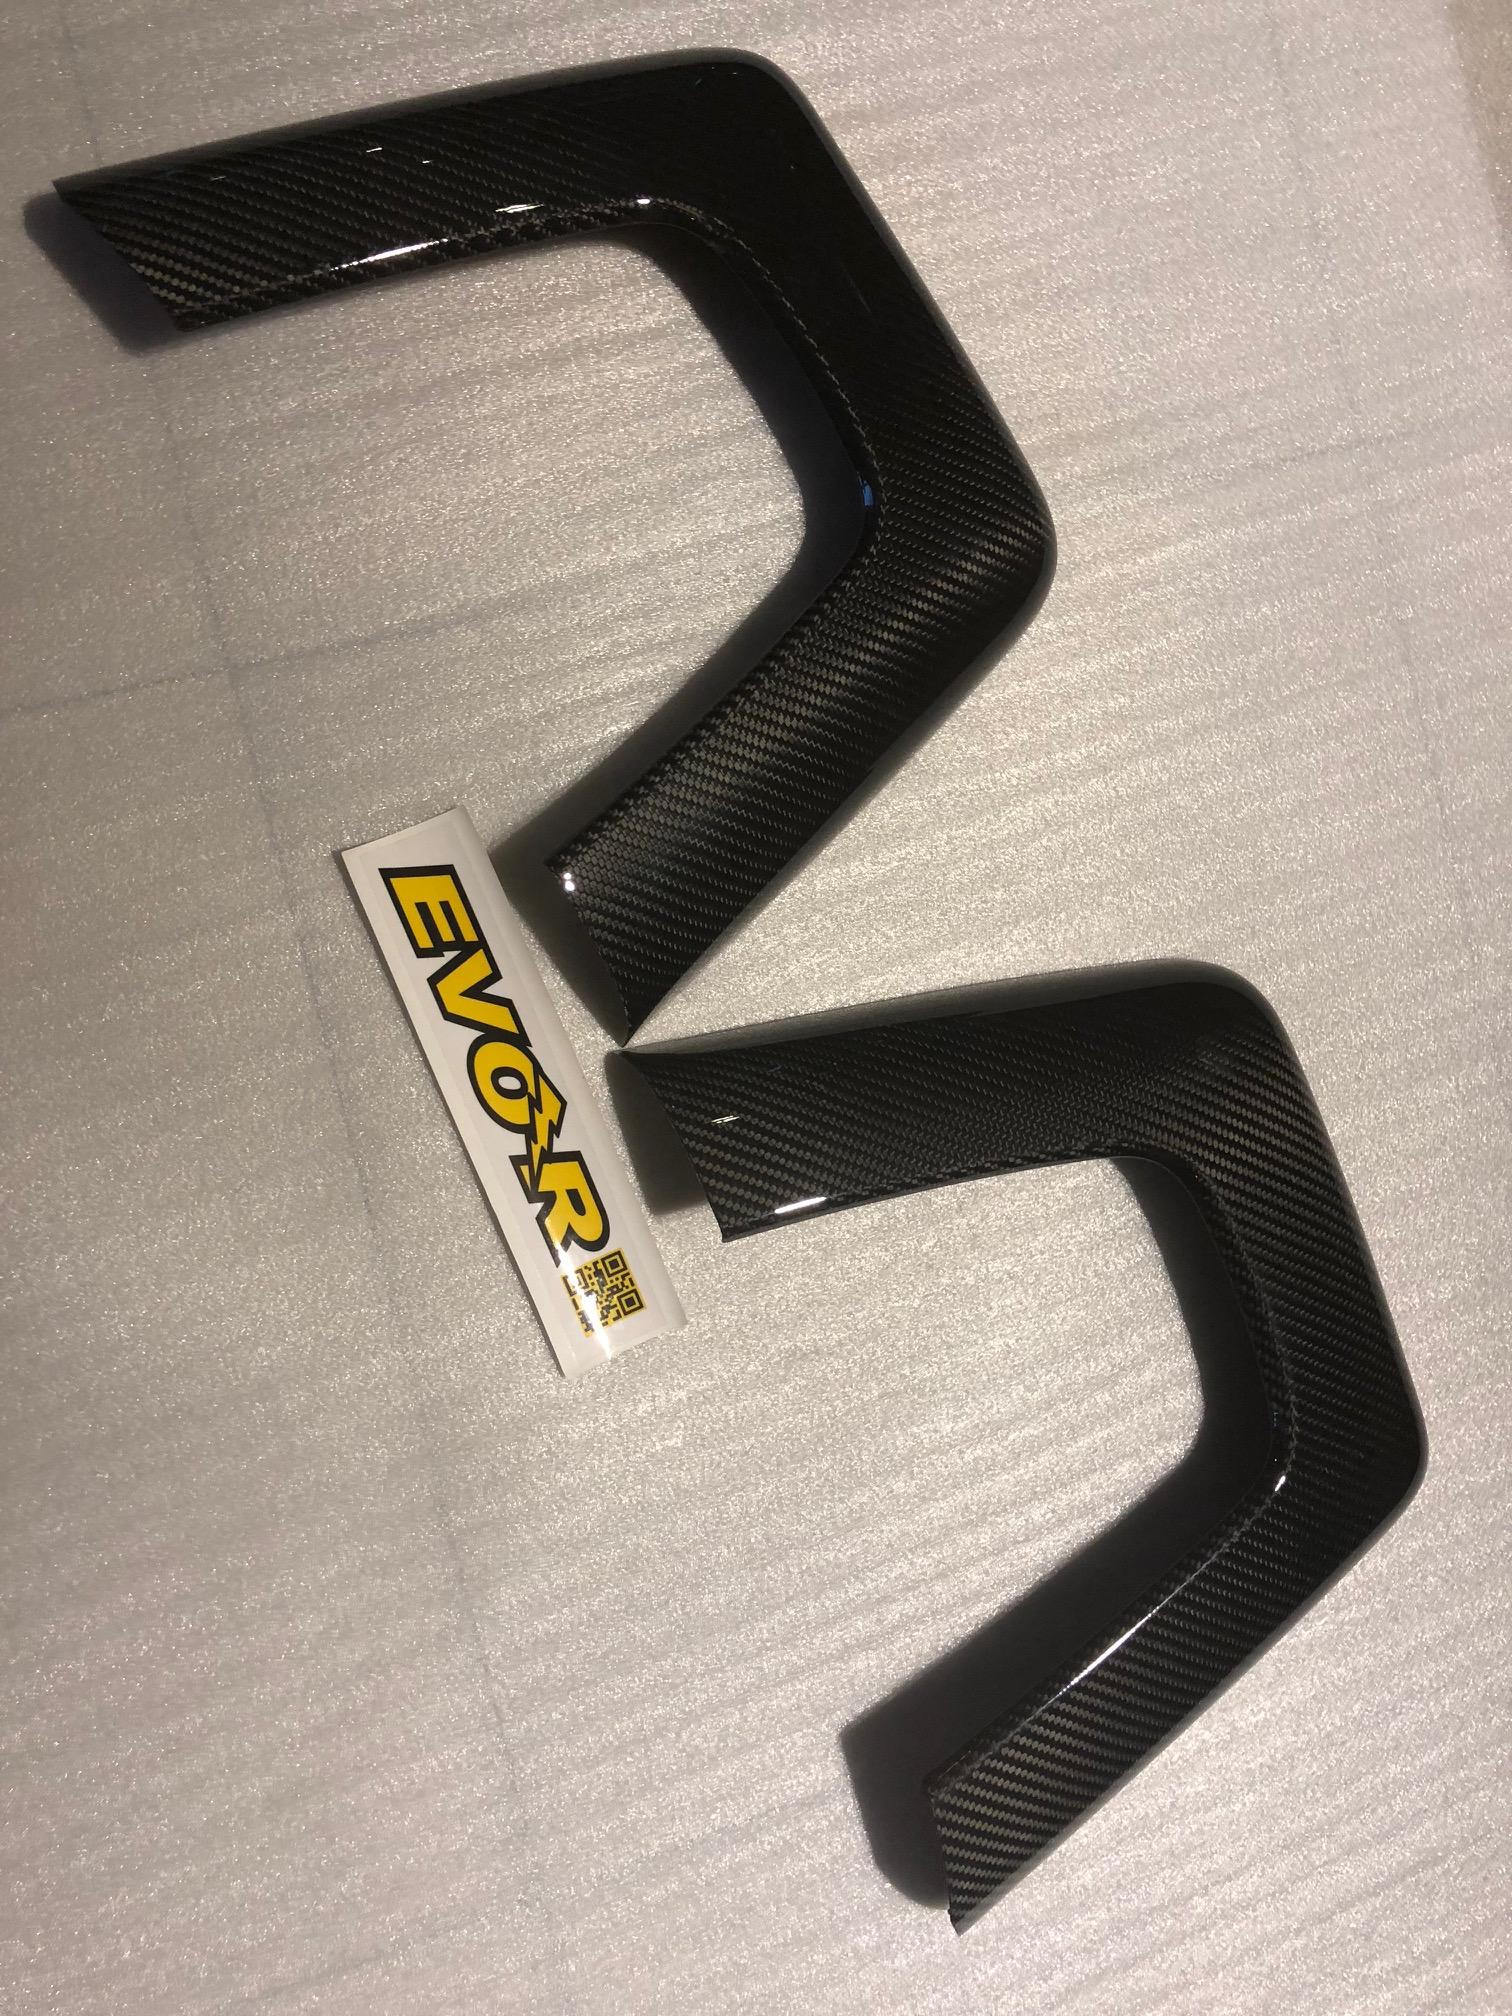 370Z Roadster convertiable Carbon Fiber Roll Bar covers